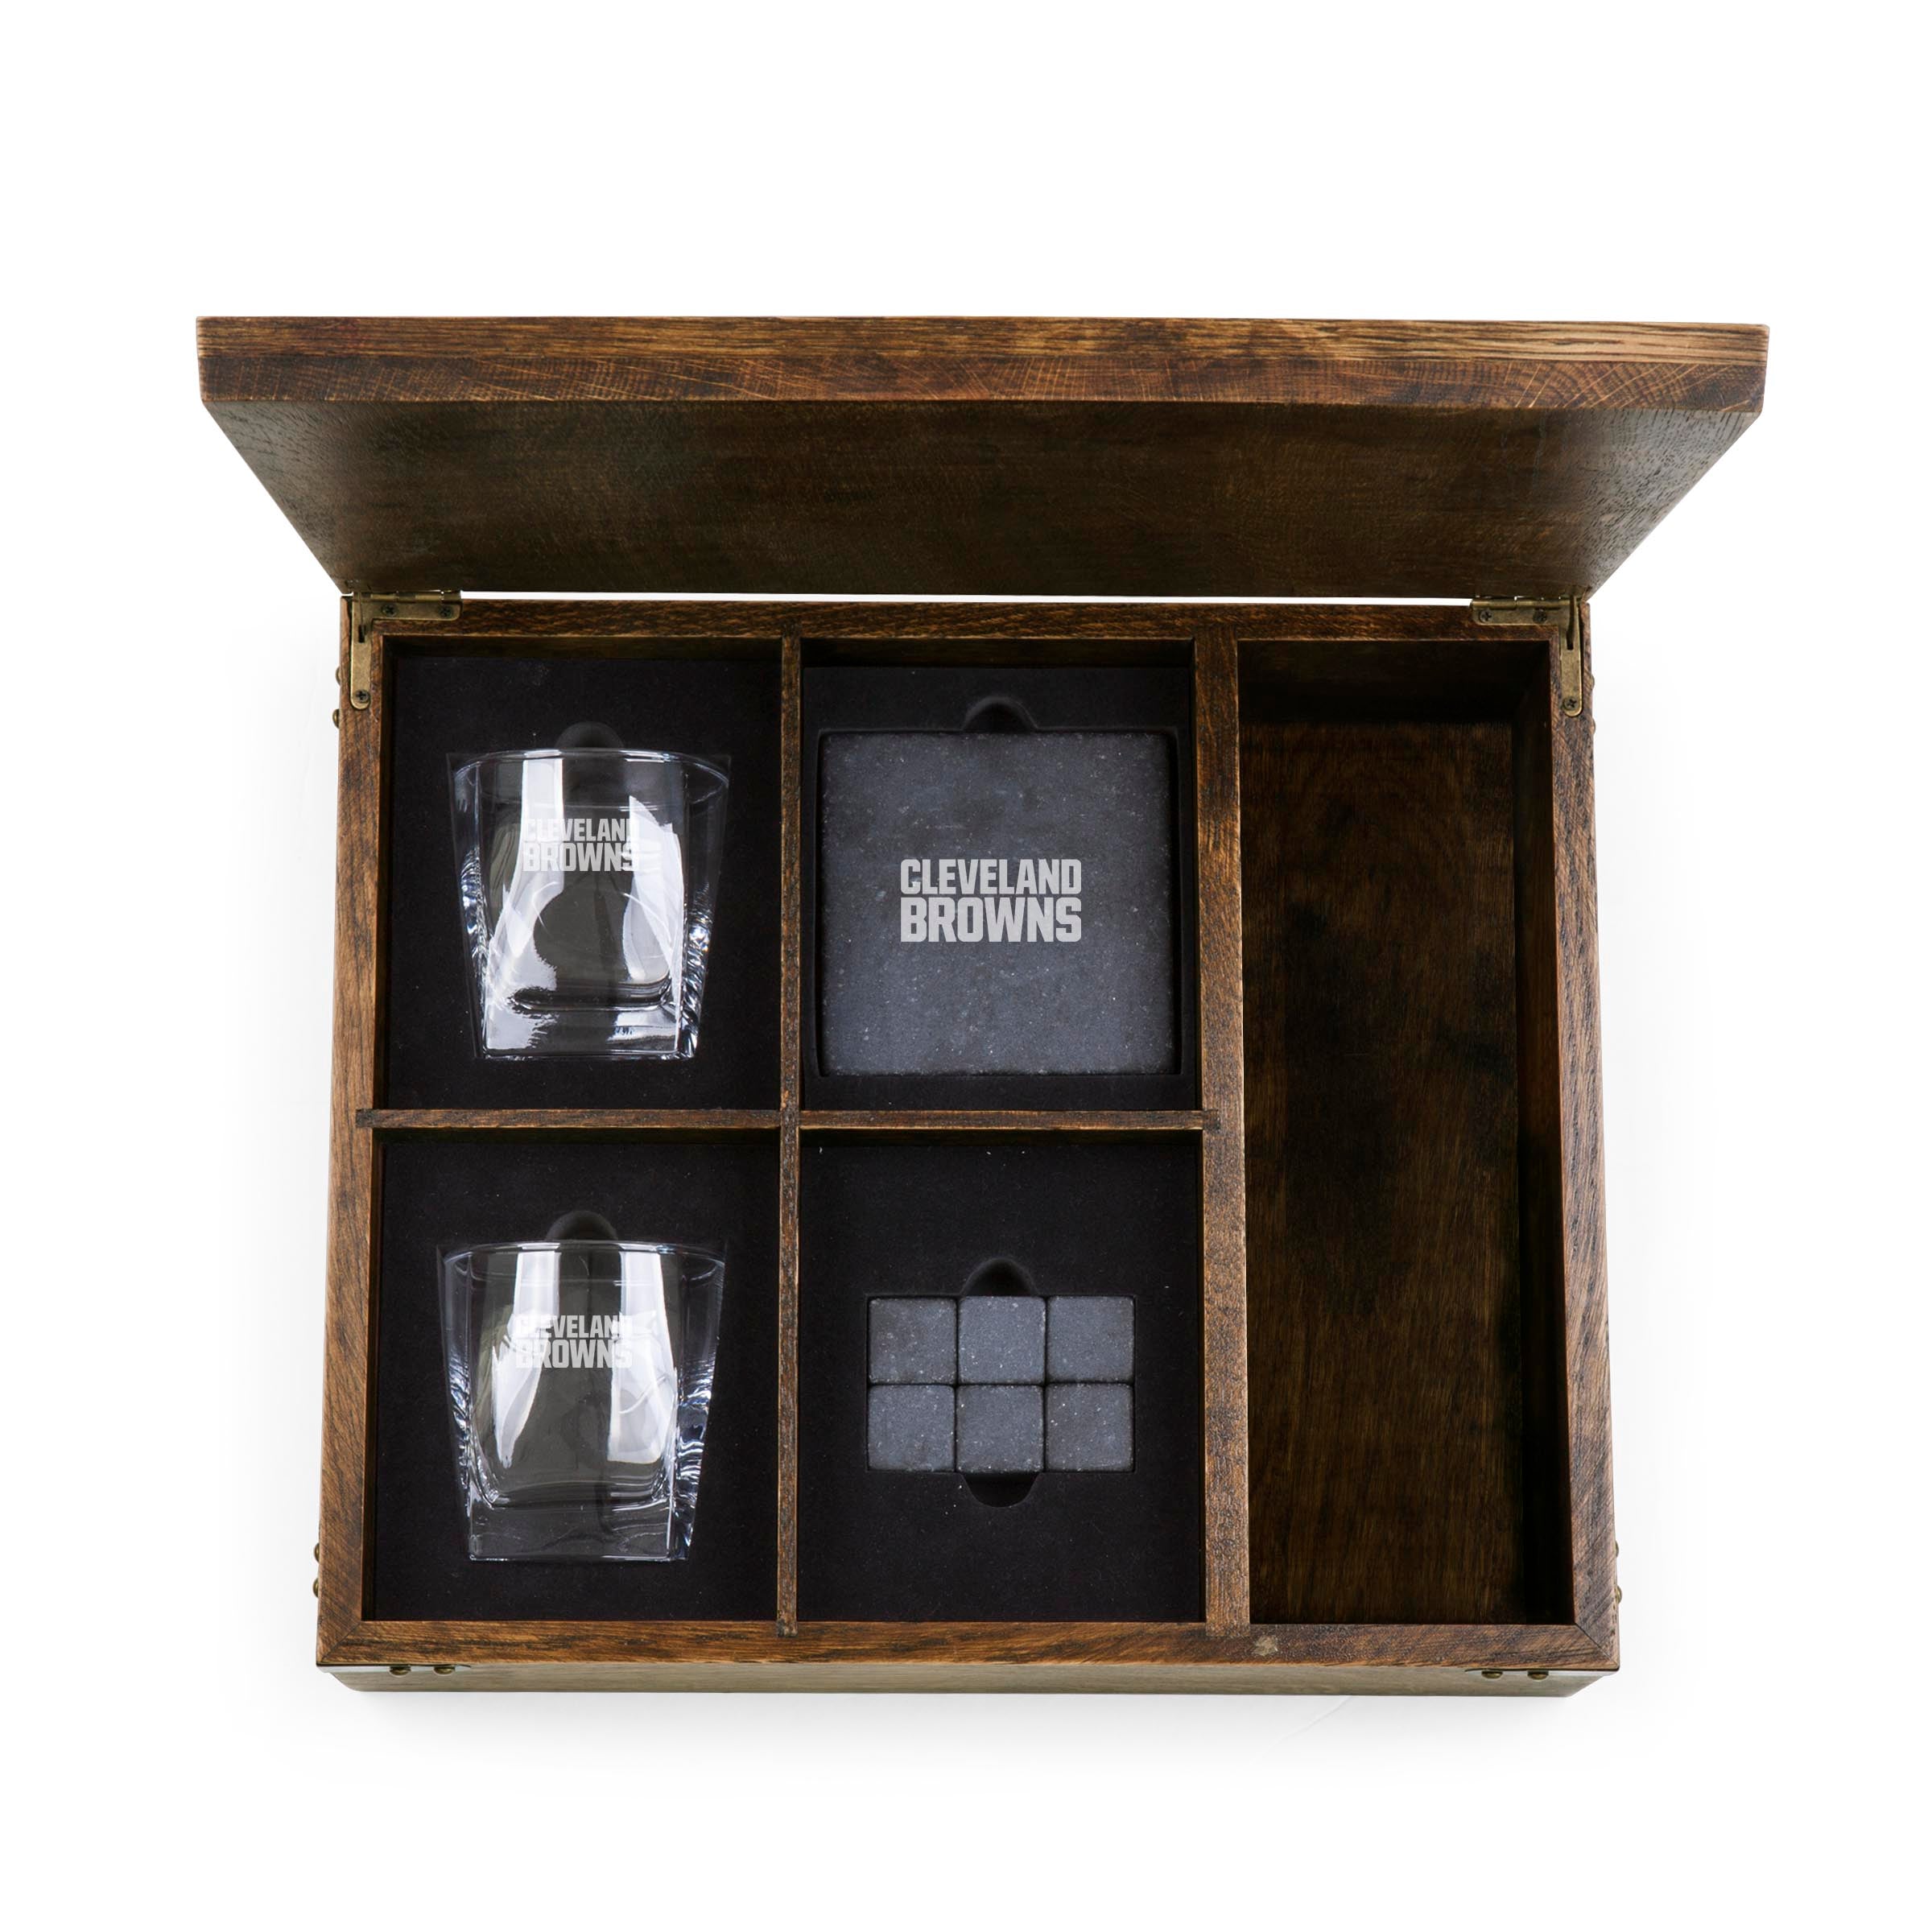 Cleveland Browns - Whiskey Box Gift Set